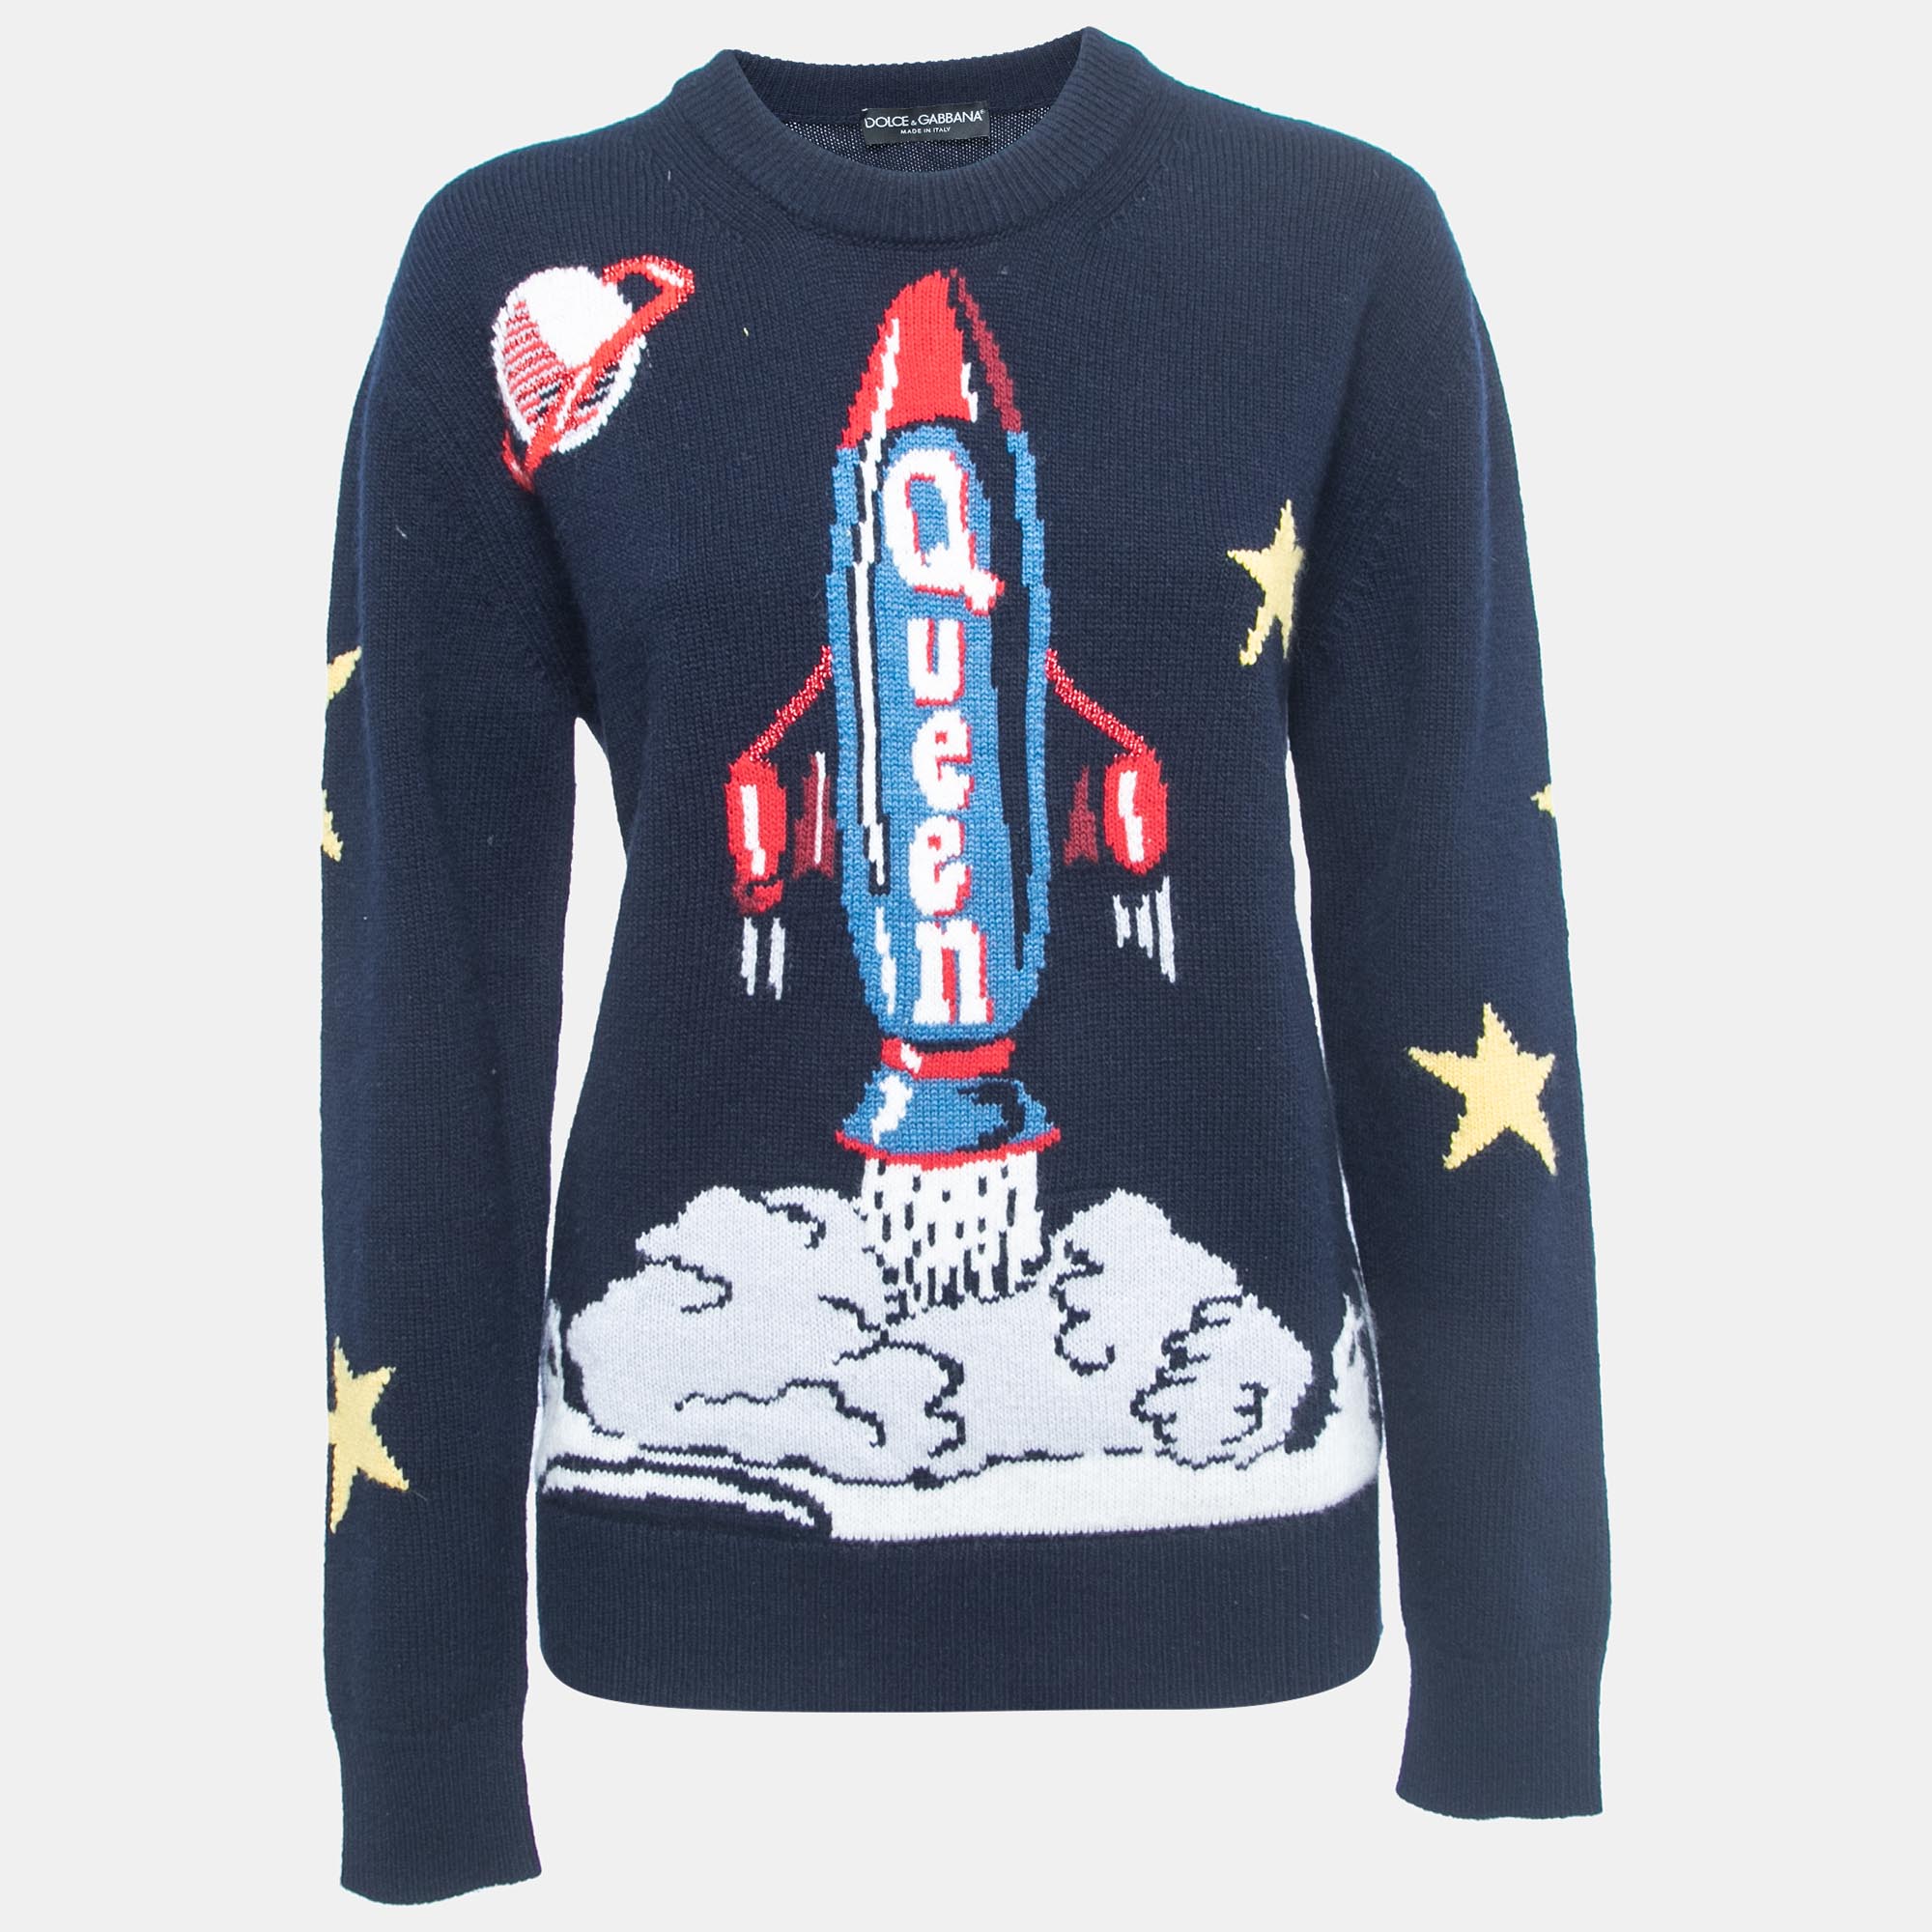 Dolce & Gabbana Navy Blue Spaceship Patterned Wool Sweater S